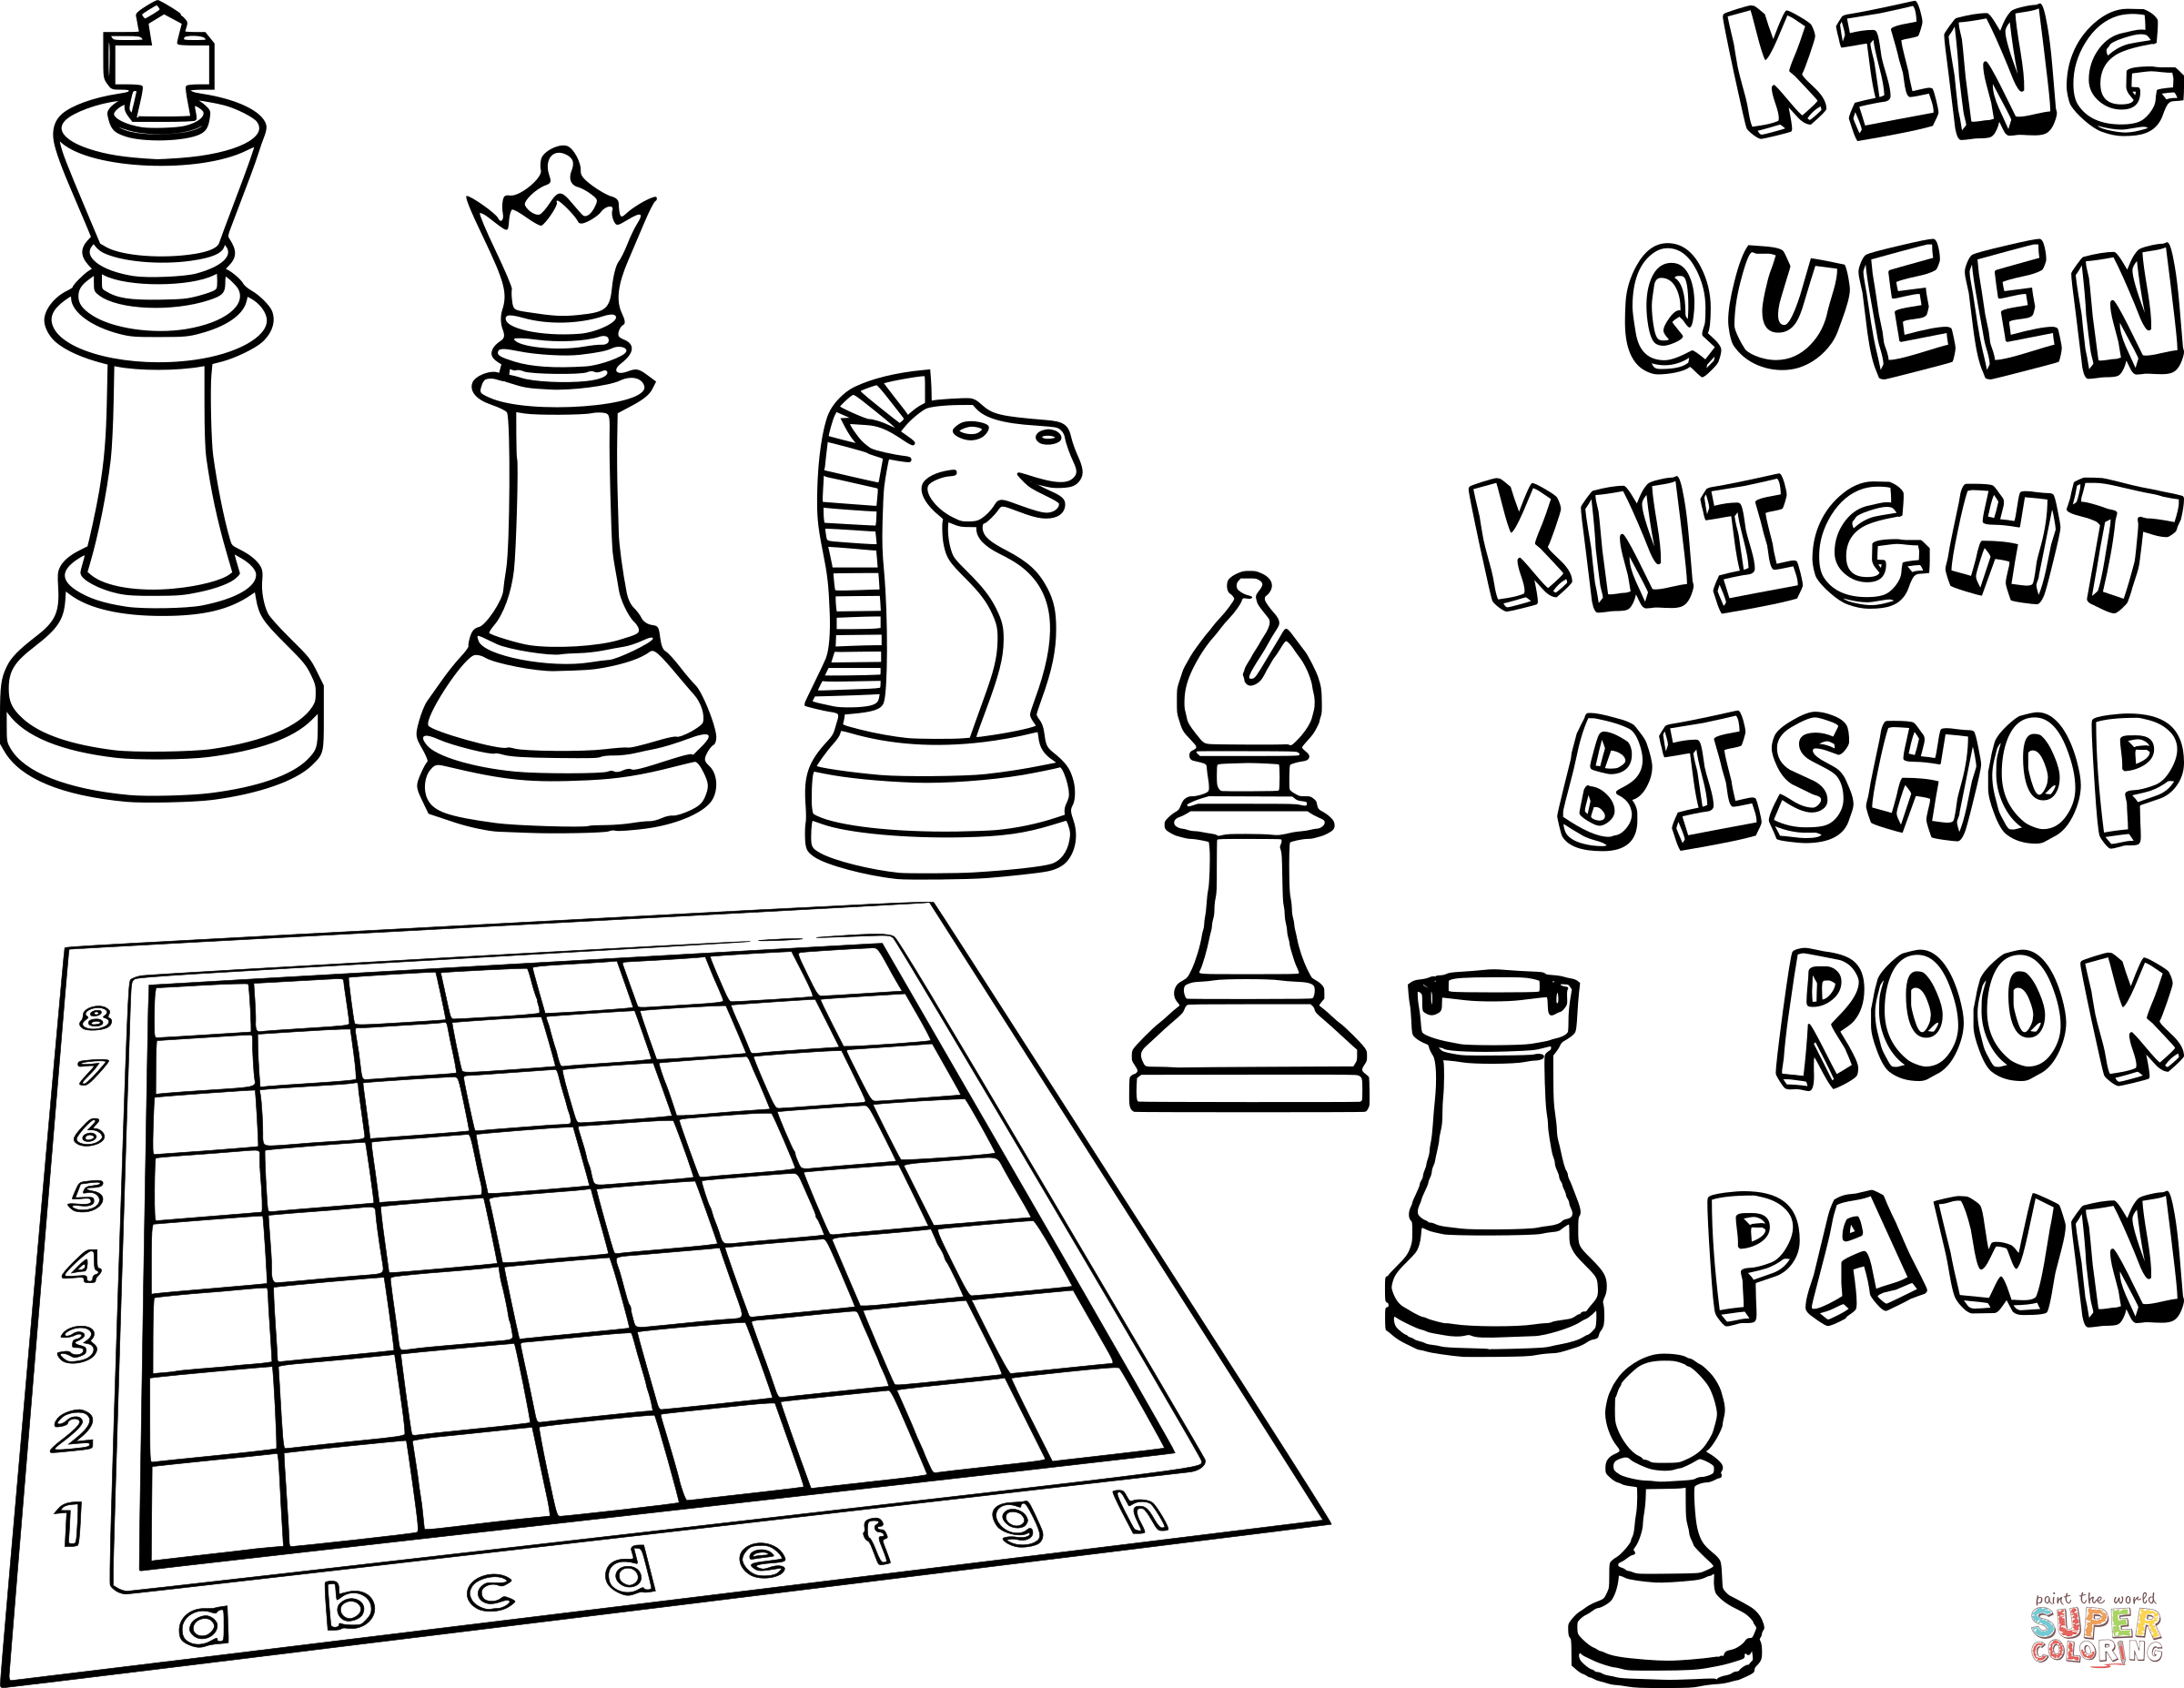 Chess pieces coloring page free printable coloring pages